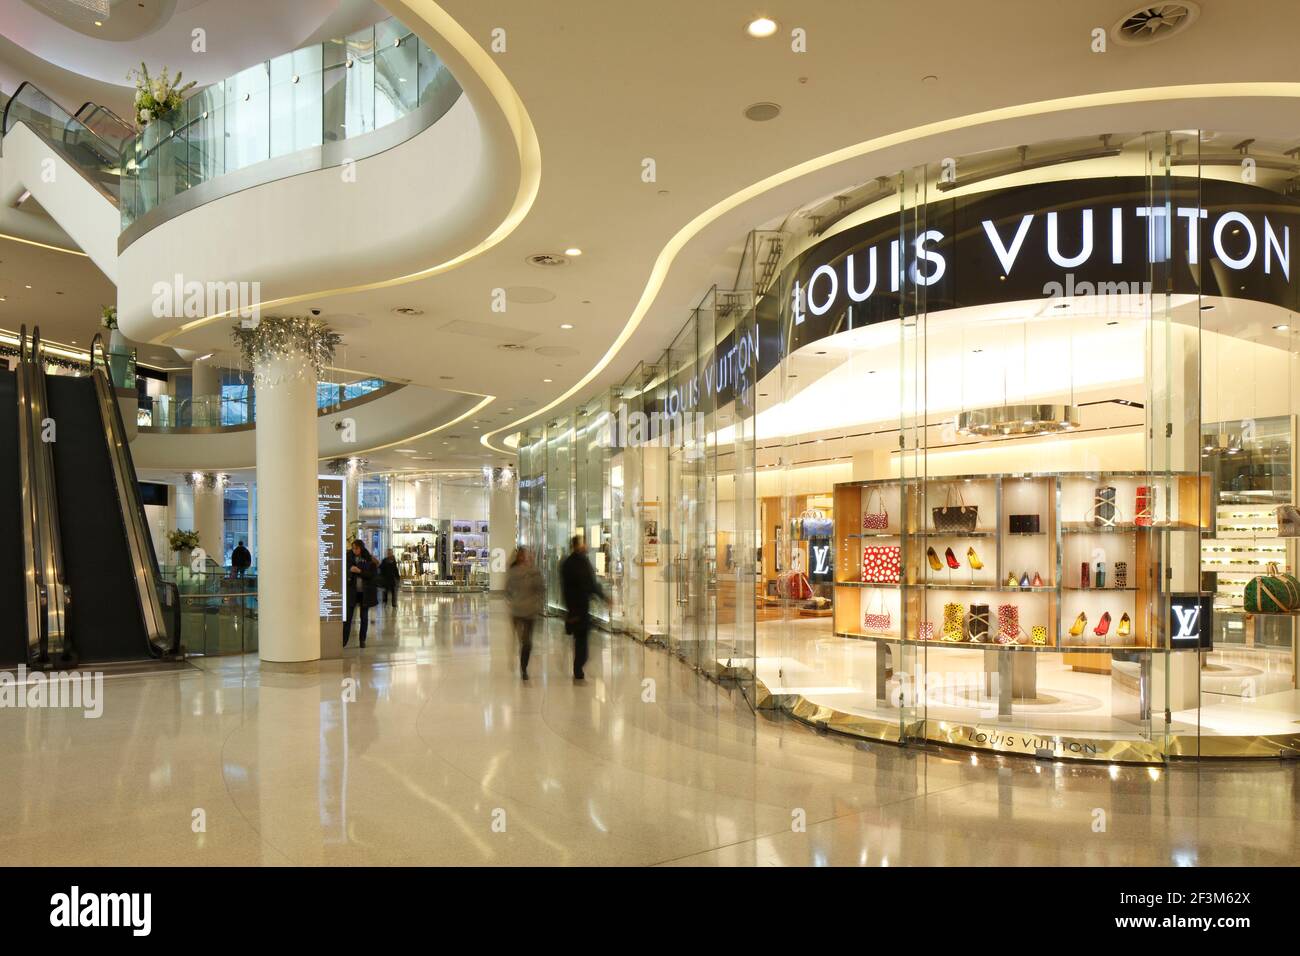 Curved Louis Vuitton shopfront in White City Westfield shopping mall, Architect: Jason Forbes